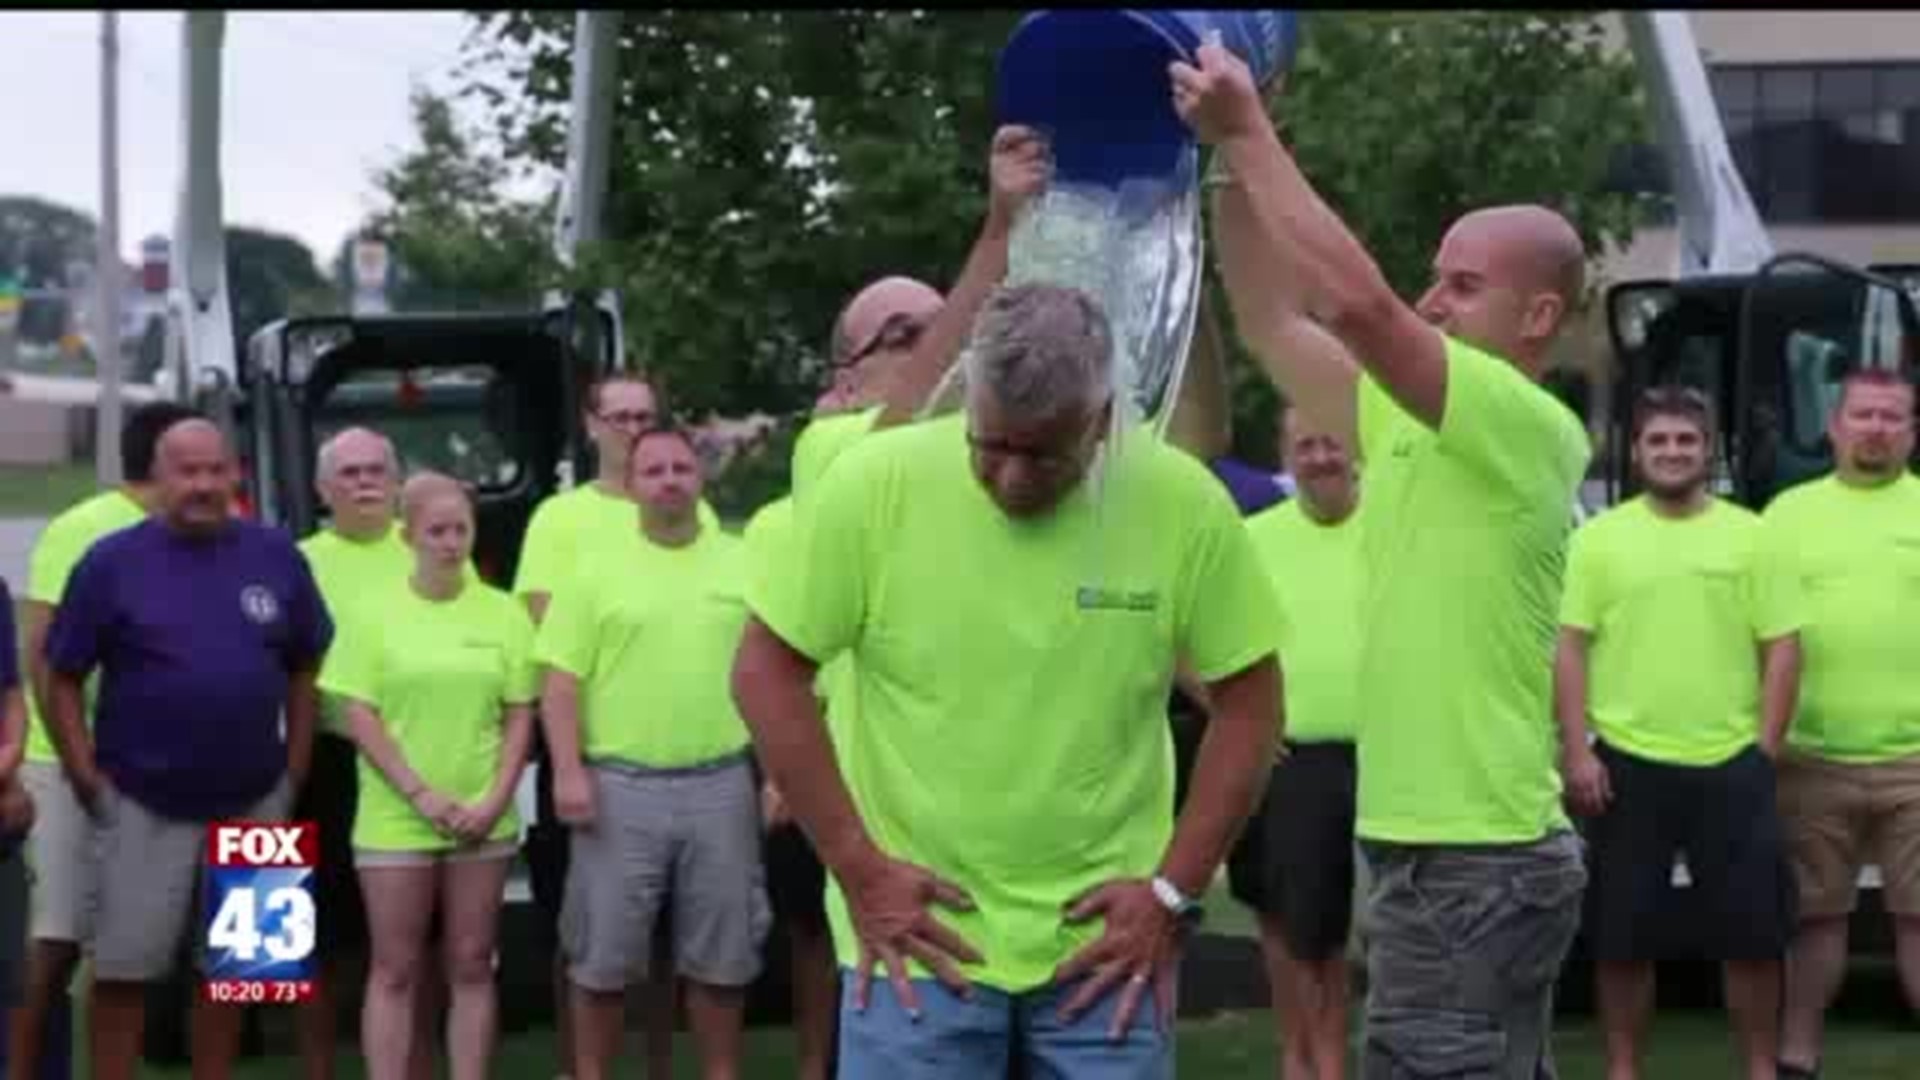 An Ice Bucket Challenge for a Fellow Employee